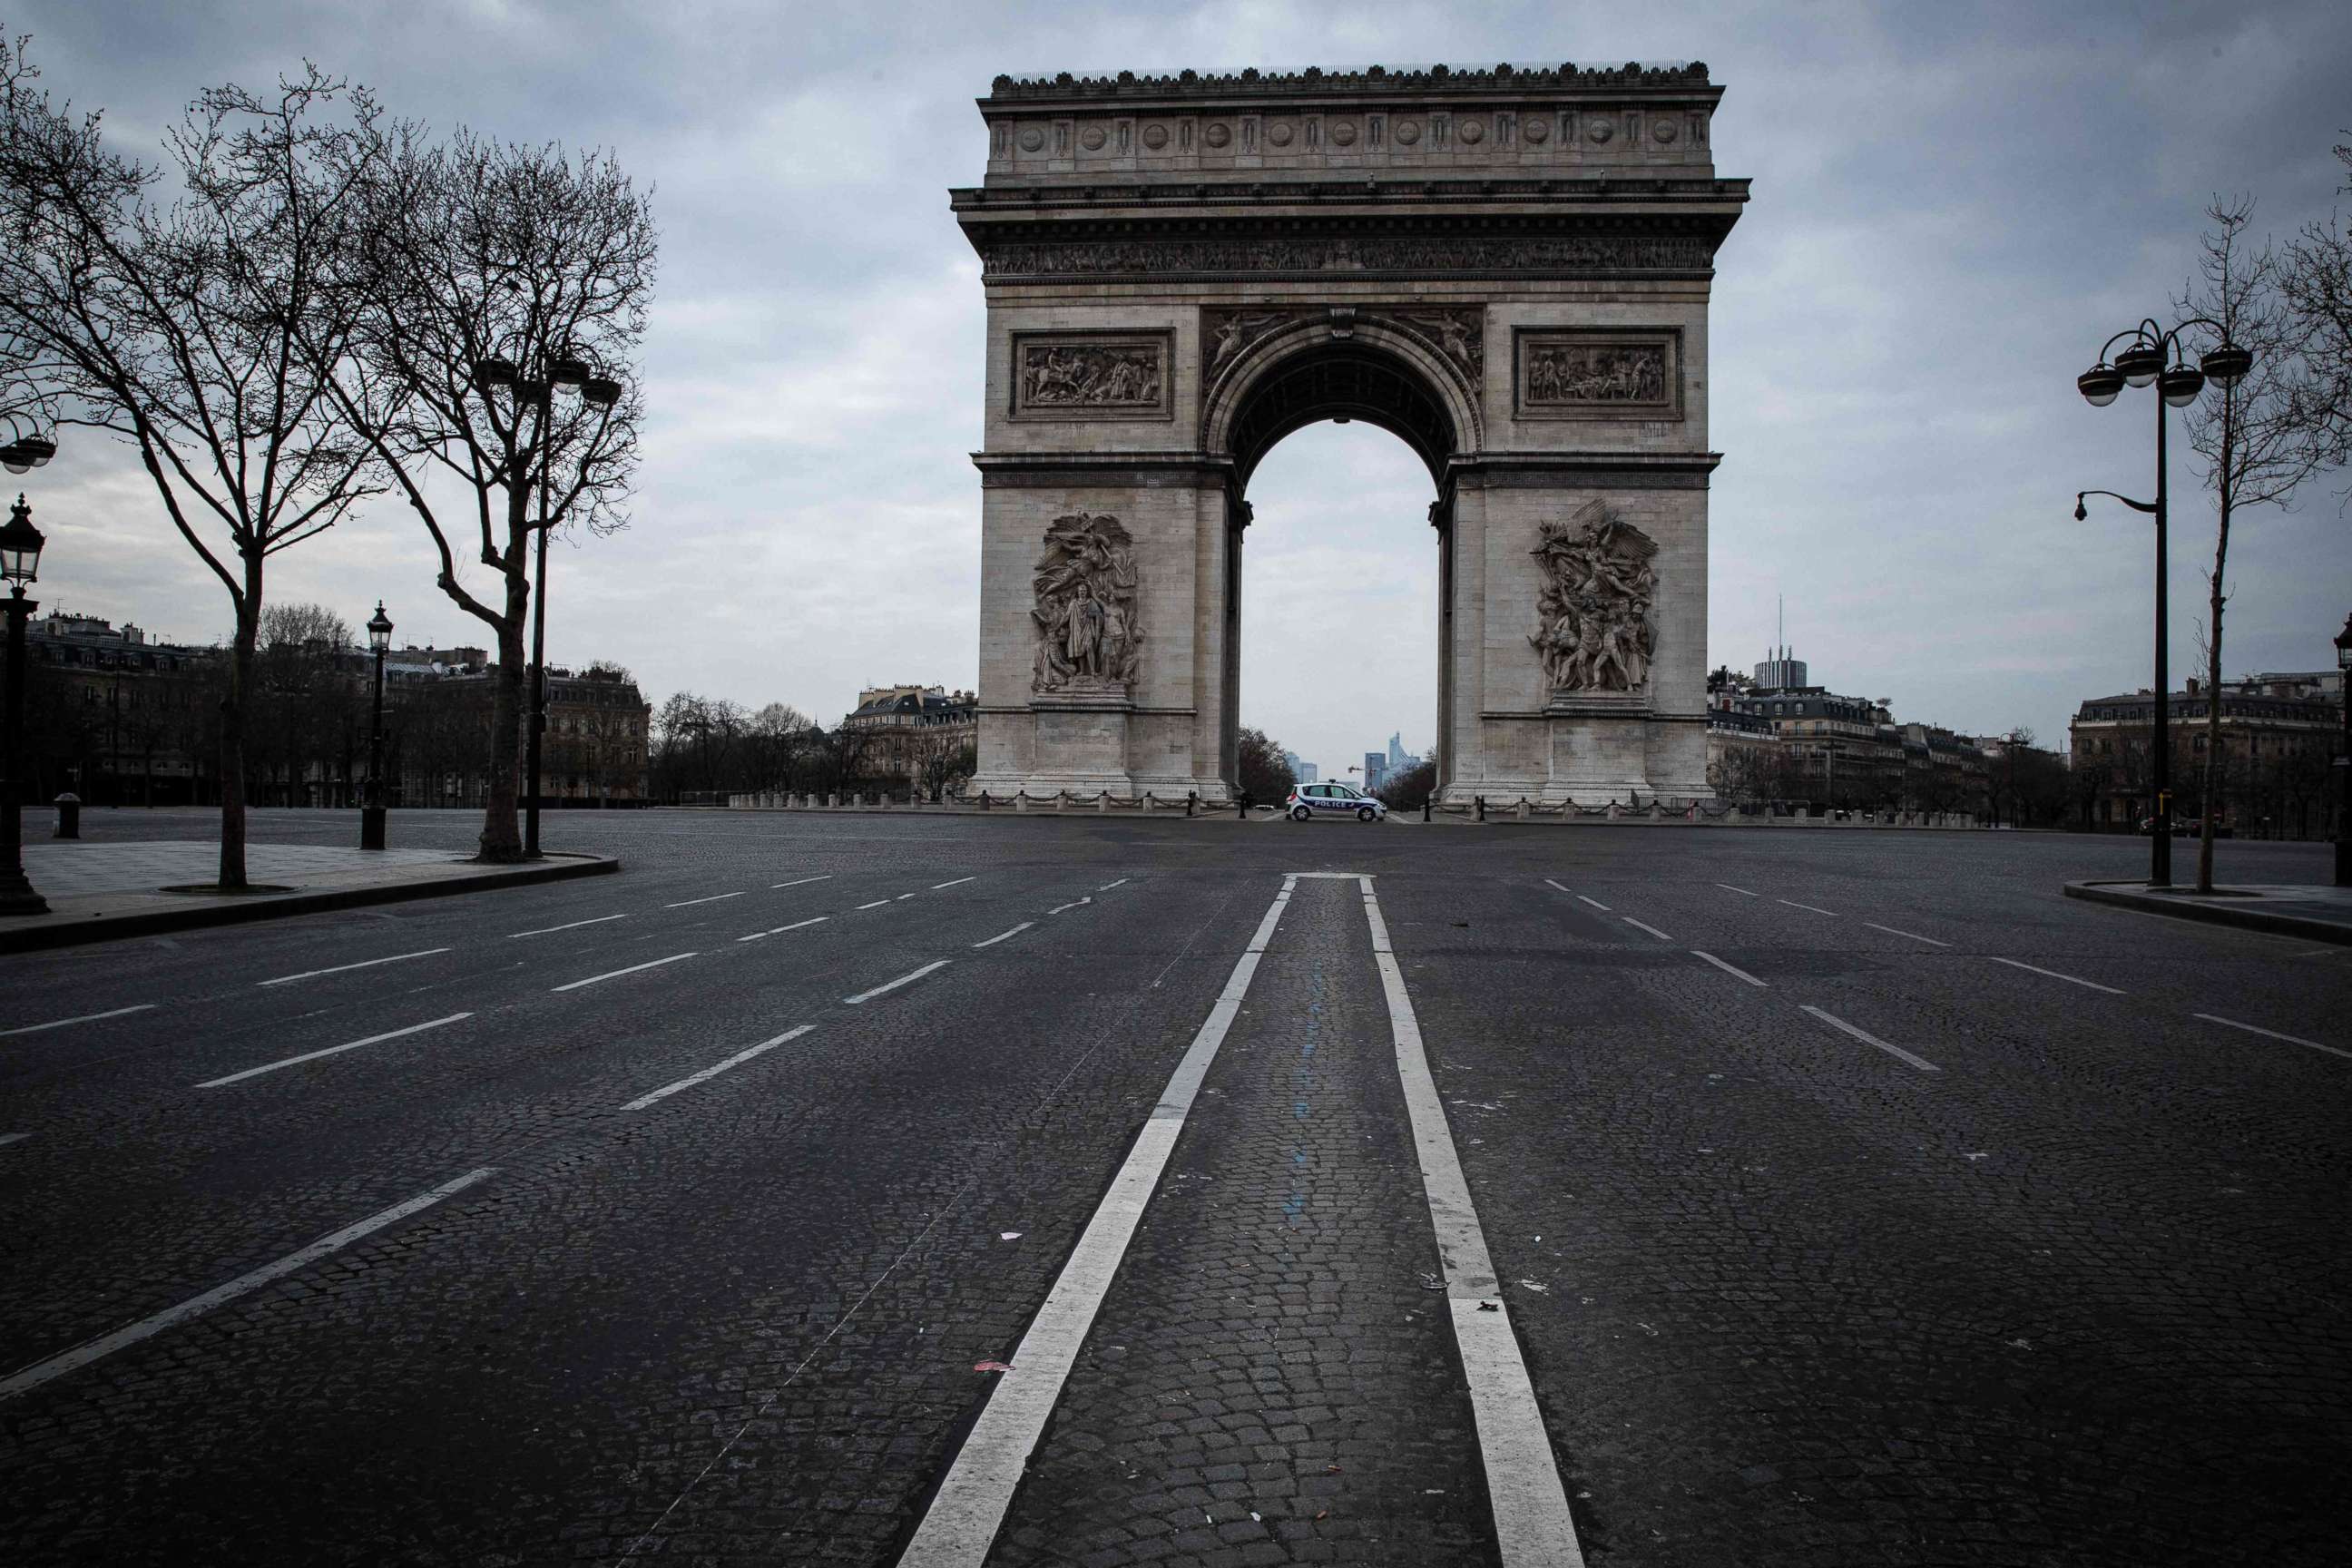 PHOTO: The Arc de Triomphe in Paris, as a strict lockdown came into in effect in France to stop the spread of COVID-19 caused by the novel coronavirus, March 17, 2020.